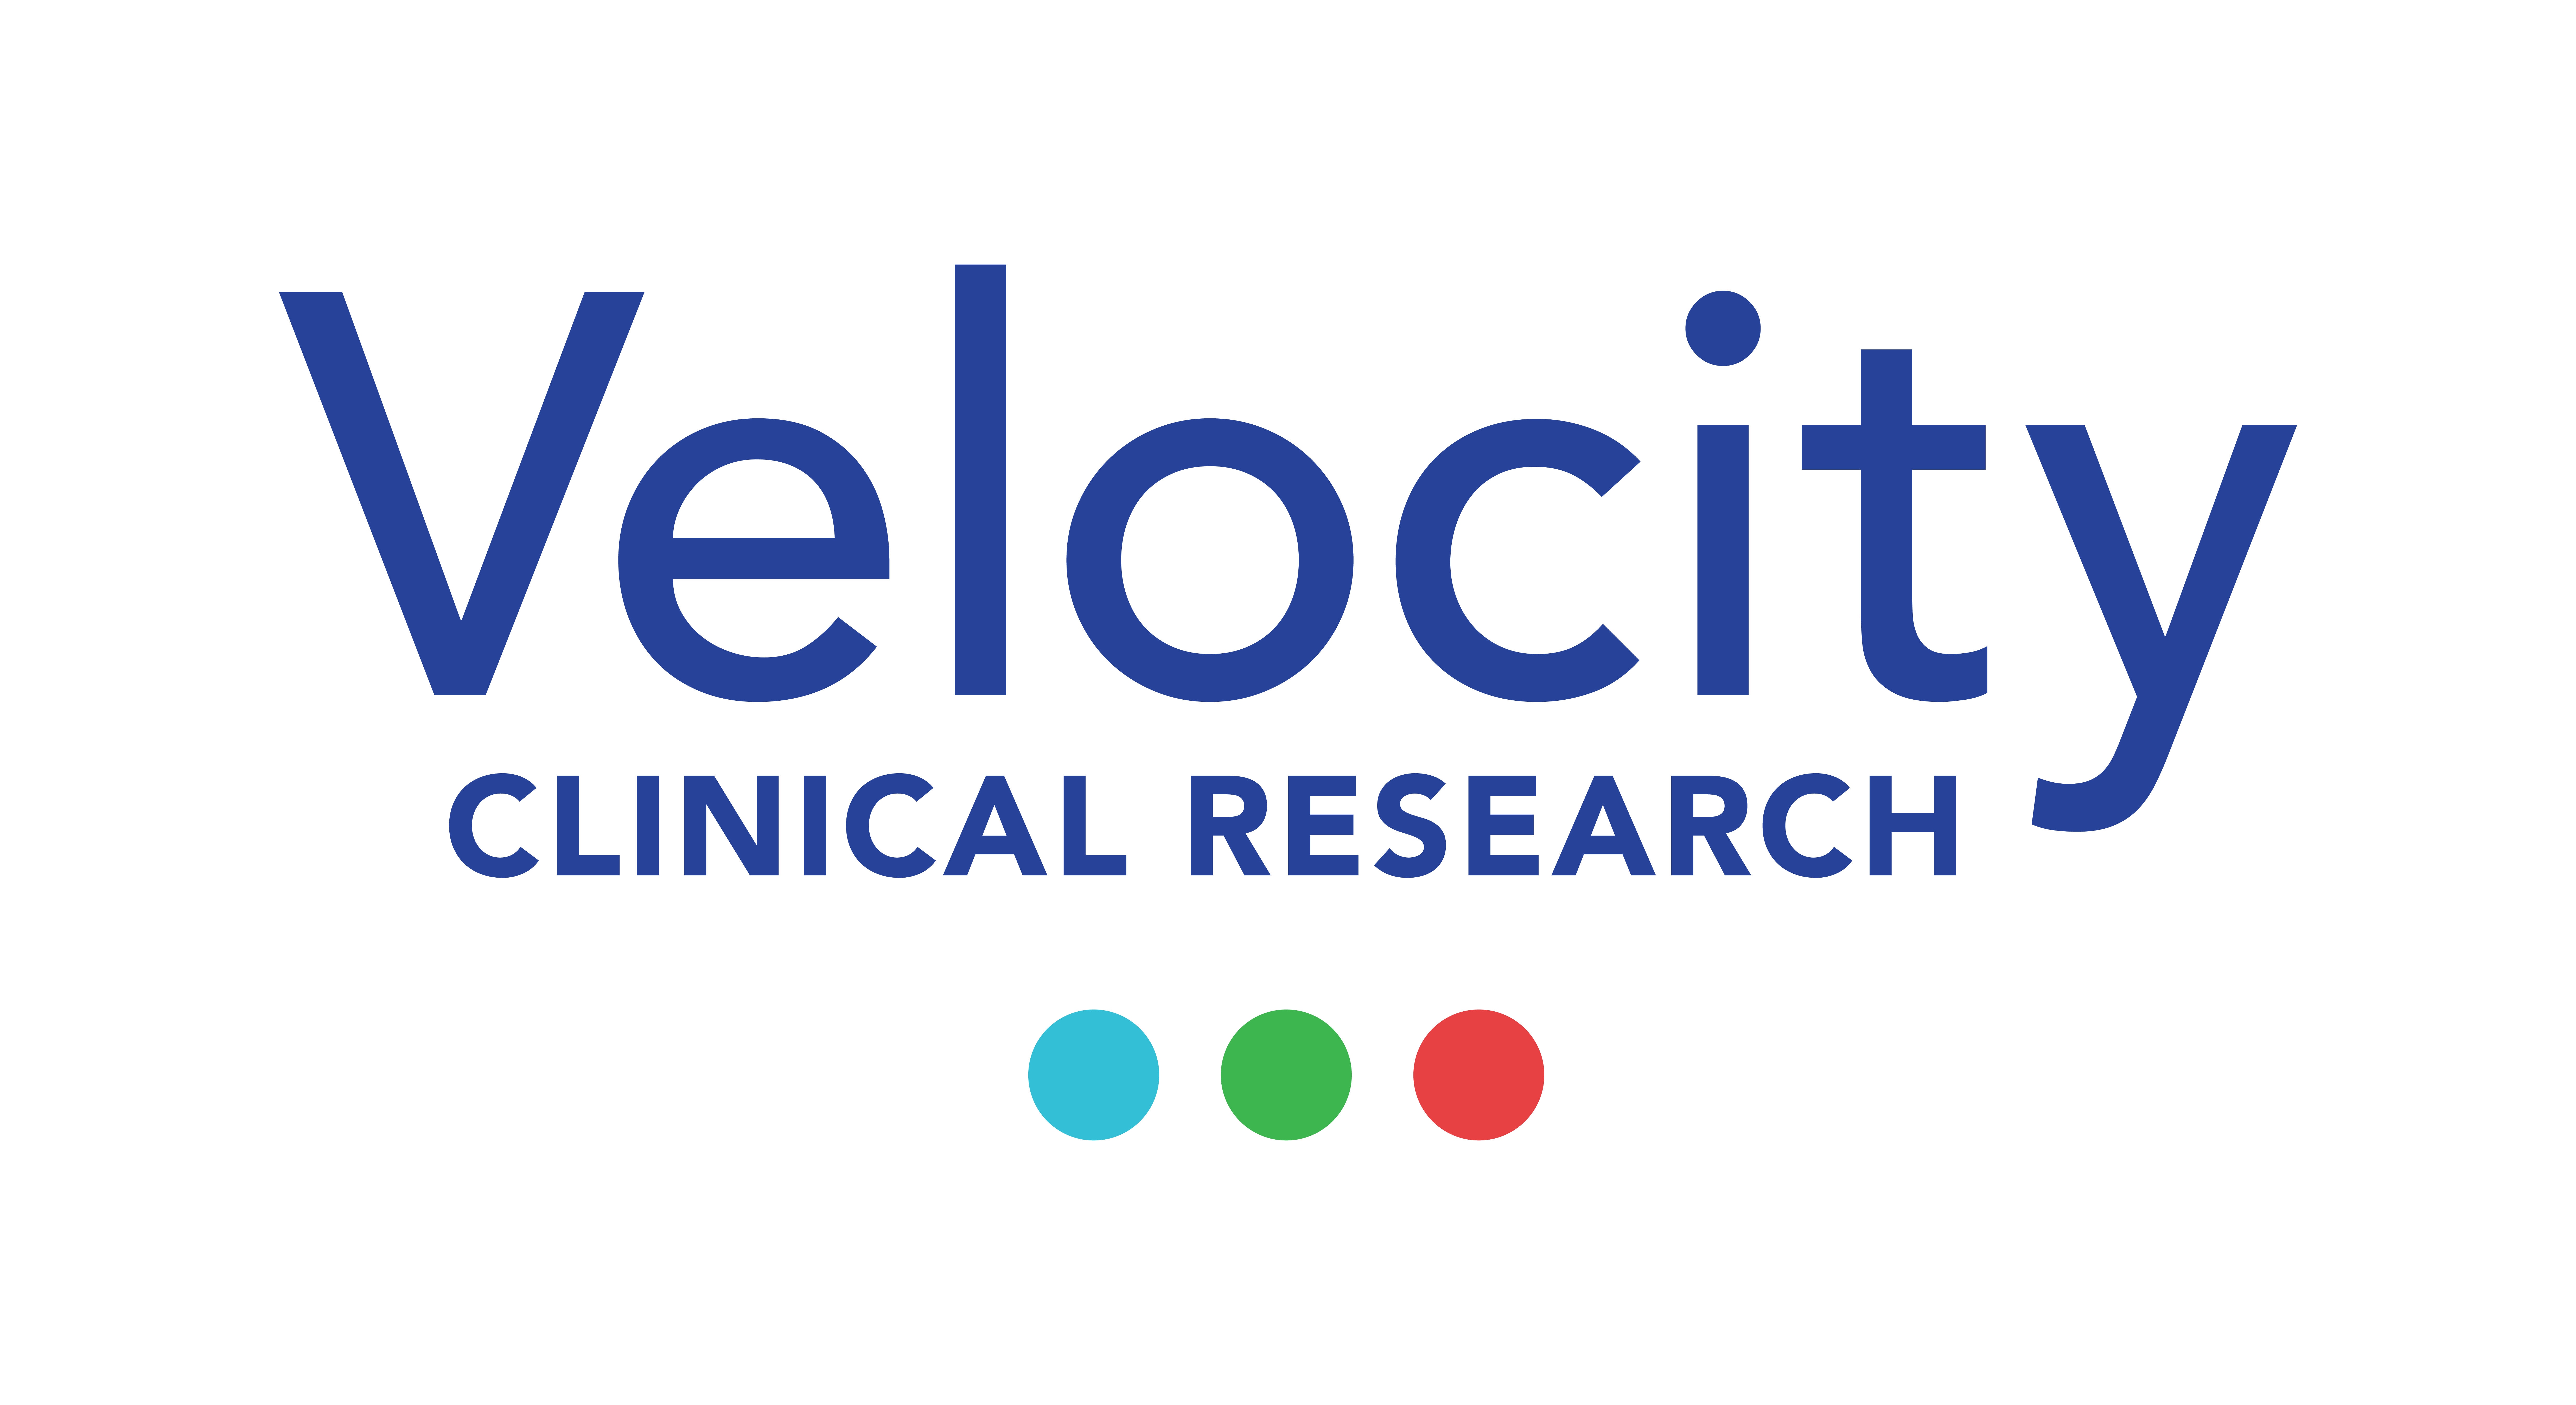 F. Velocity Clinical Research (Select)